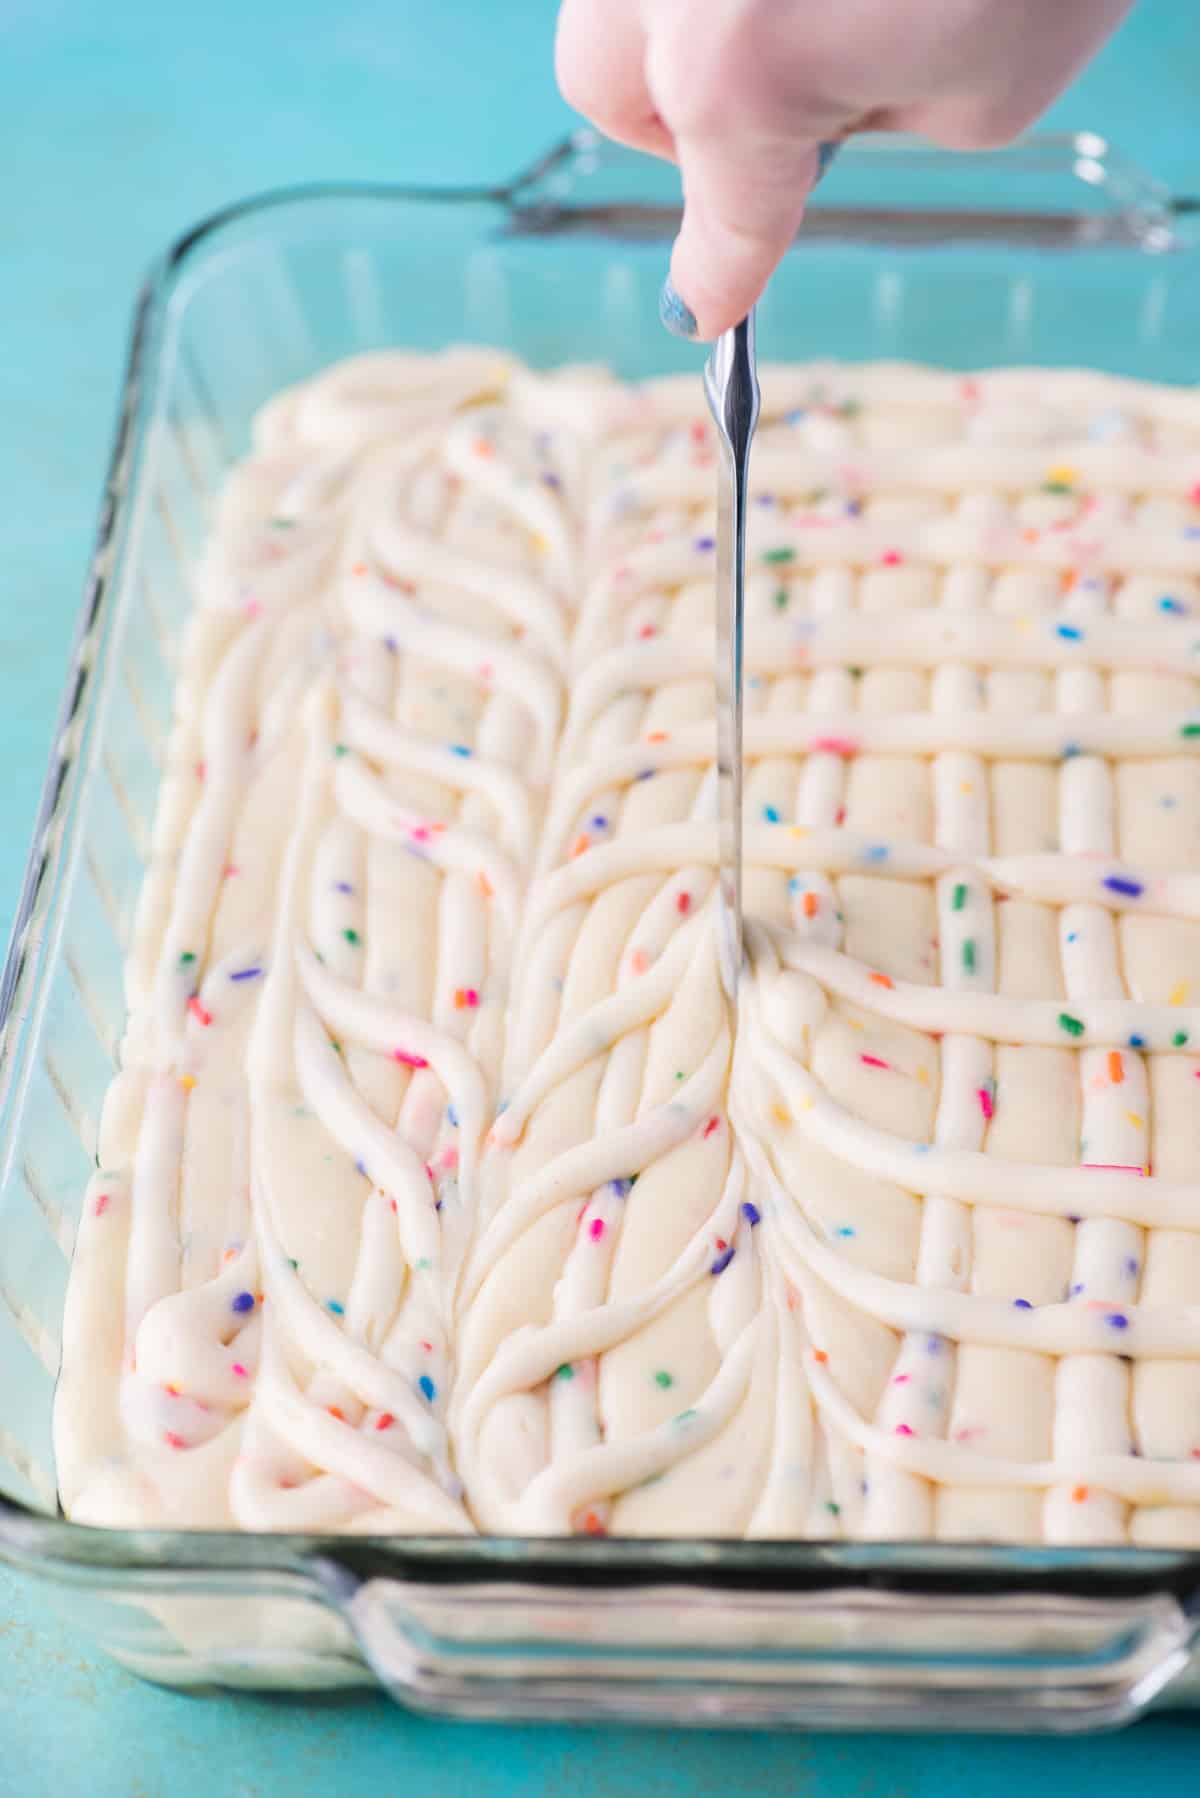 swirling cake batter and cream cheese frosting together with butter knife in glass 9x13 inch pan